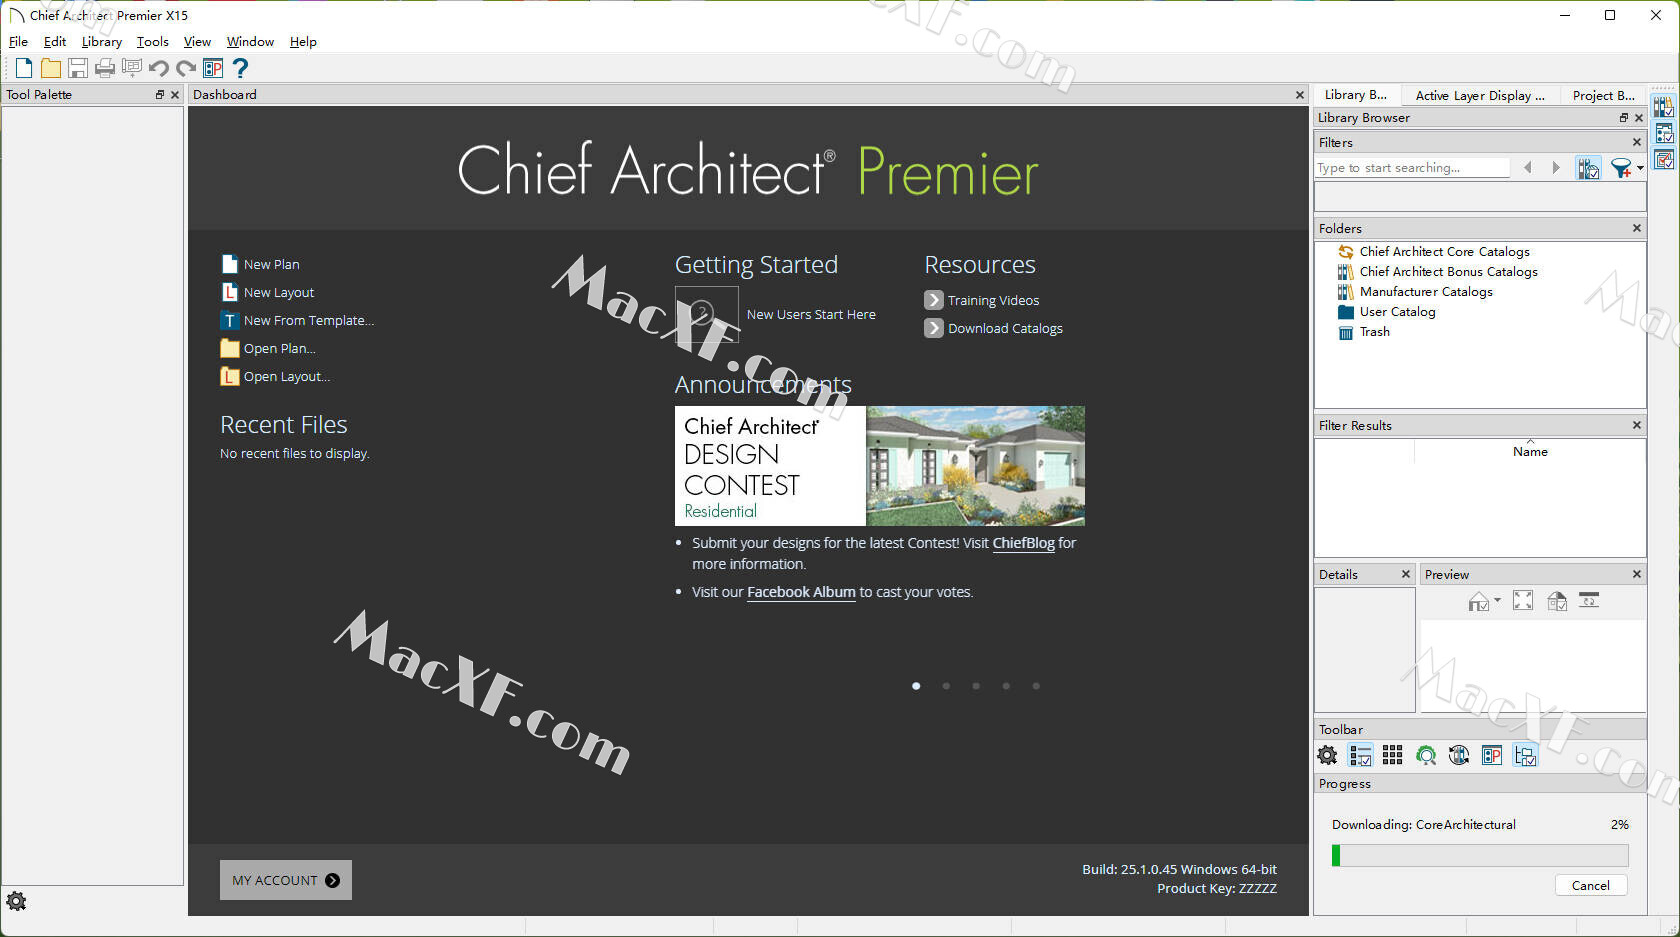 download the new version for windows Chief Architect Premier X15 v25.3.0.77 + Interiors